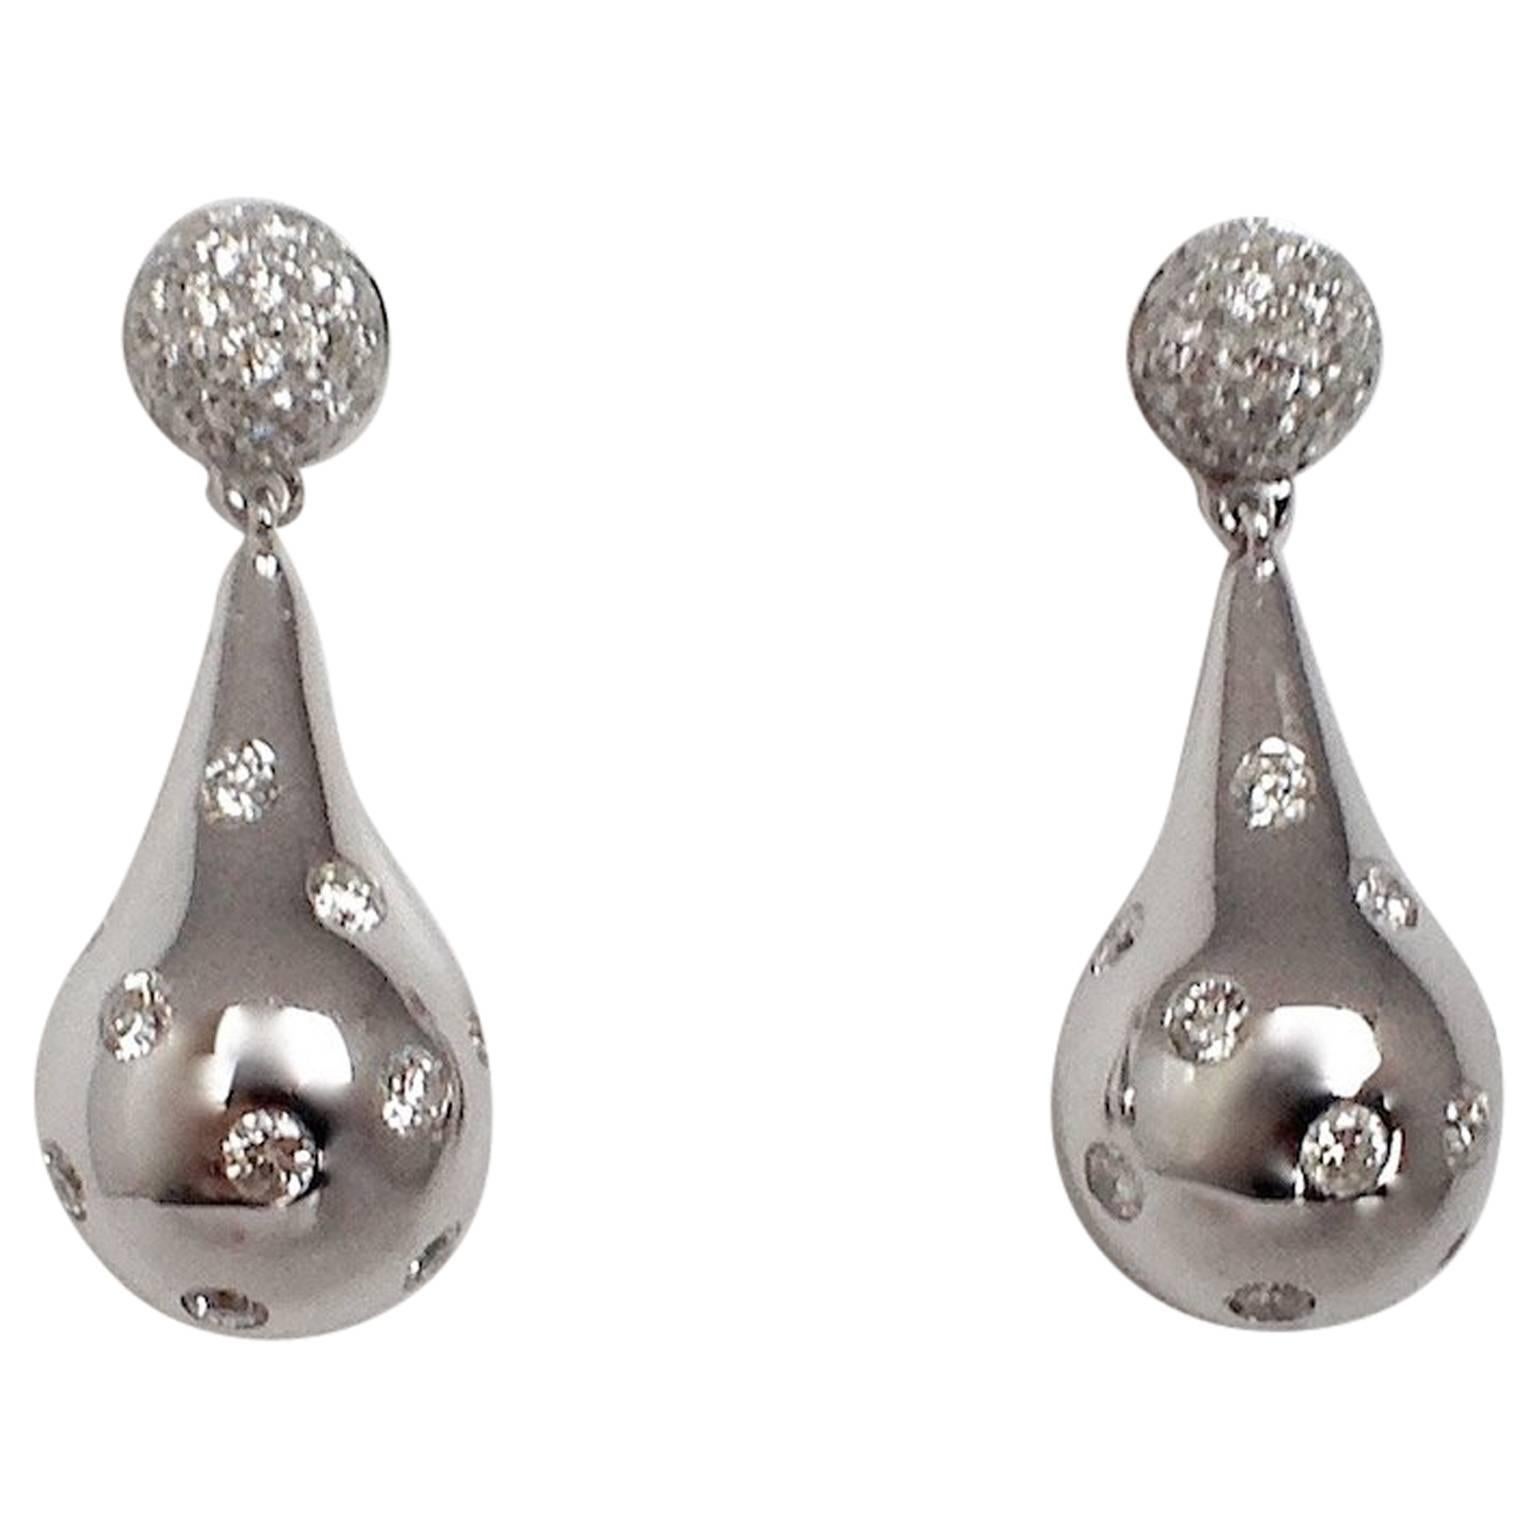 White Diamond White 18 Karat Gold Drop Earrings Made in Italy 
The earrings have a small button studded with small diamonds and below, which dangles, a drop of gold set in an irregular way with some diamonds.
The total carat of diamonds is ct